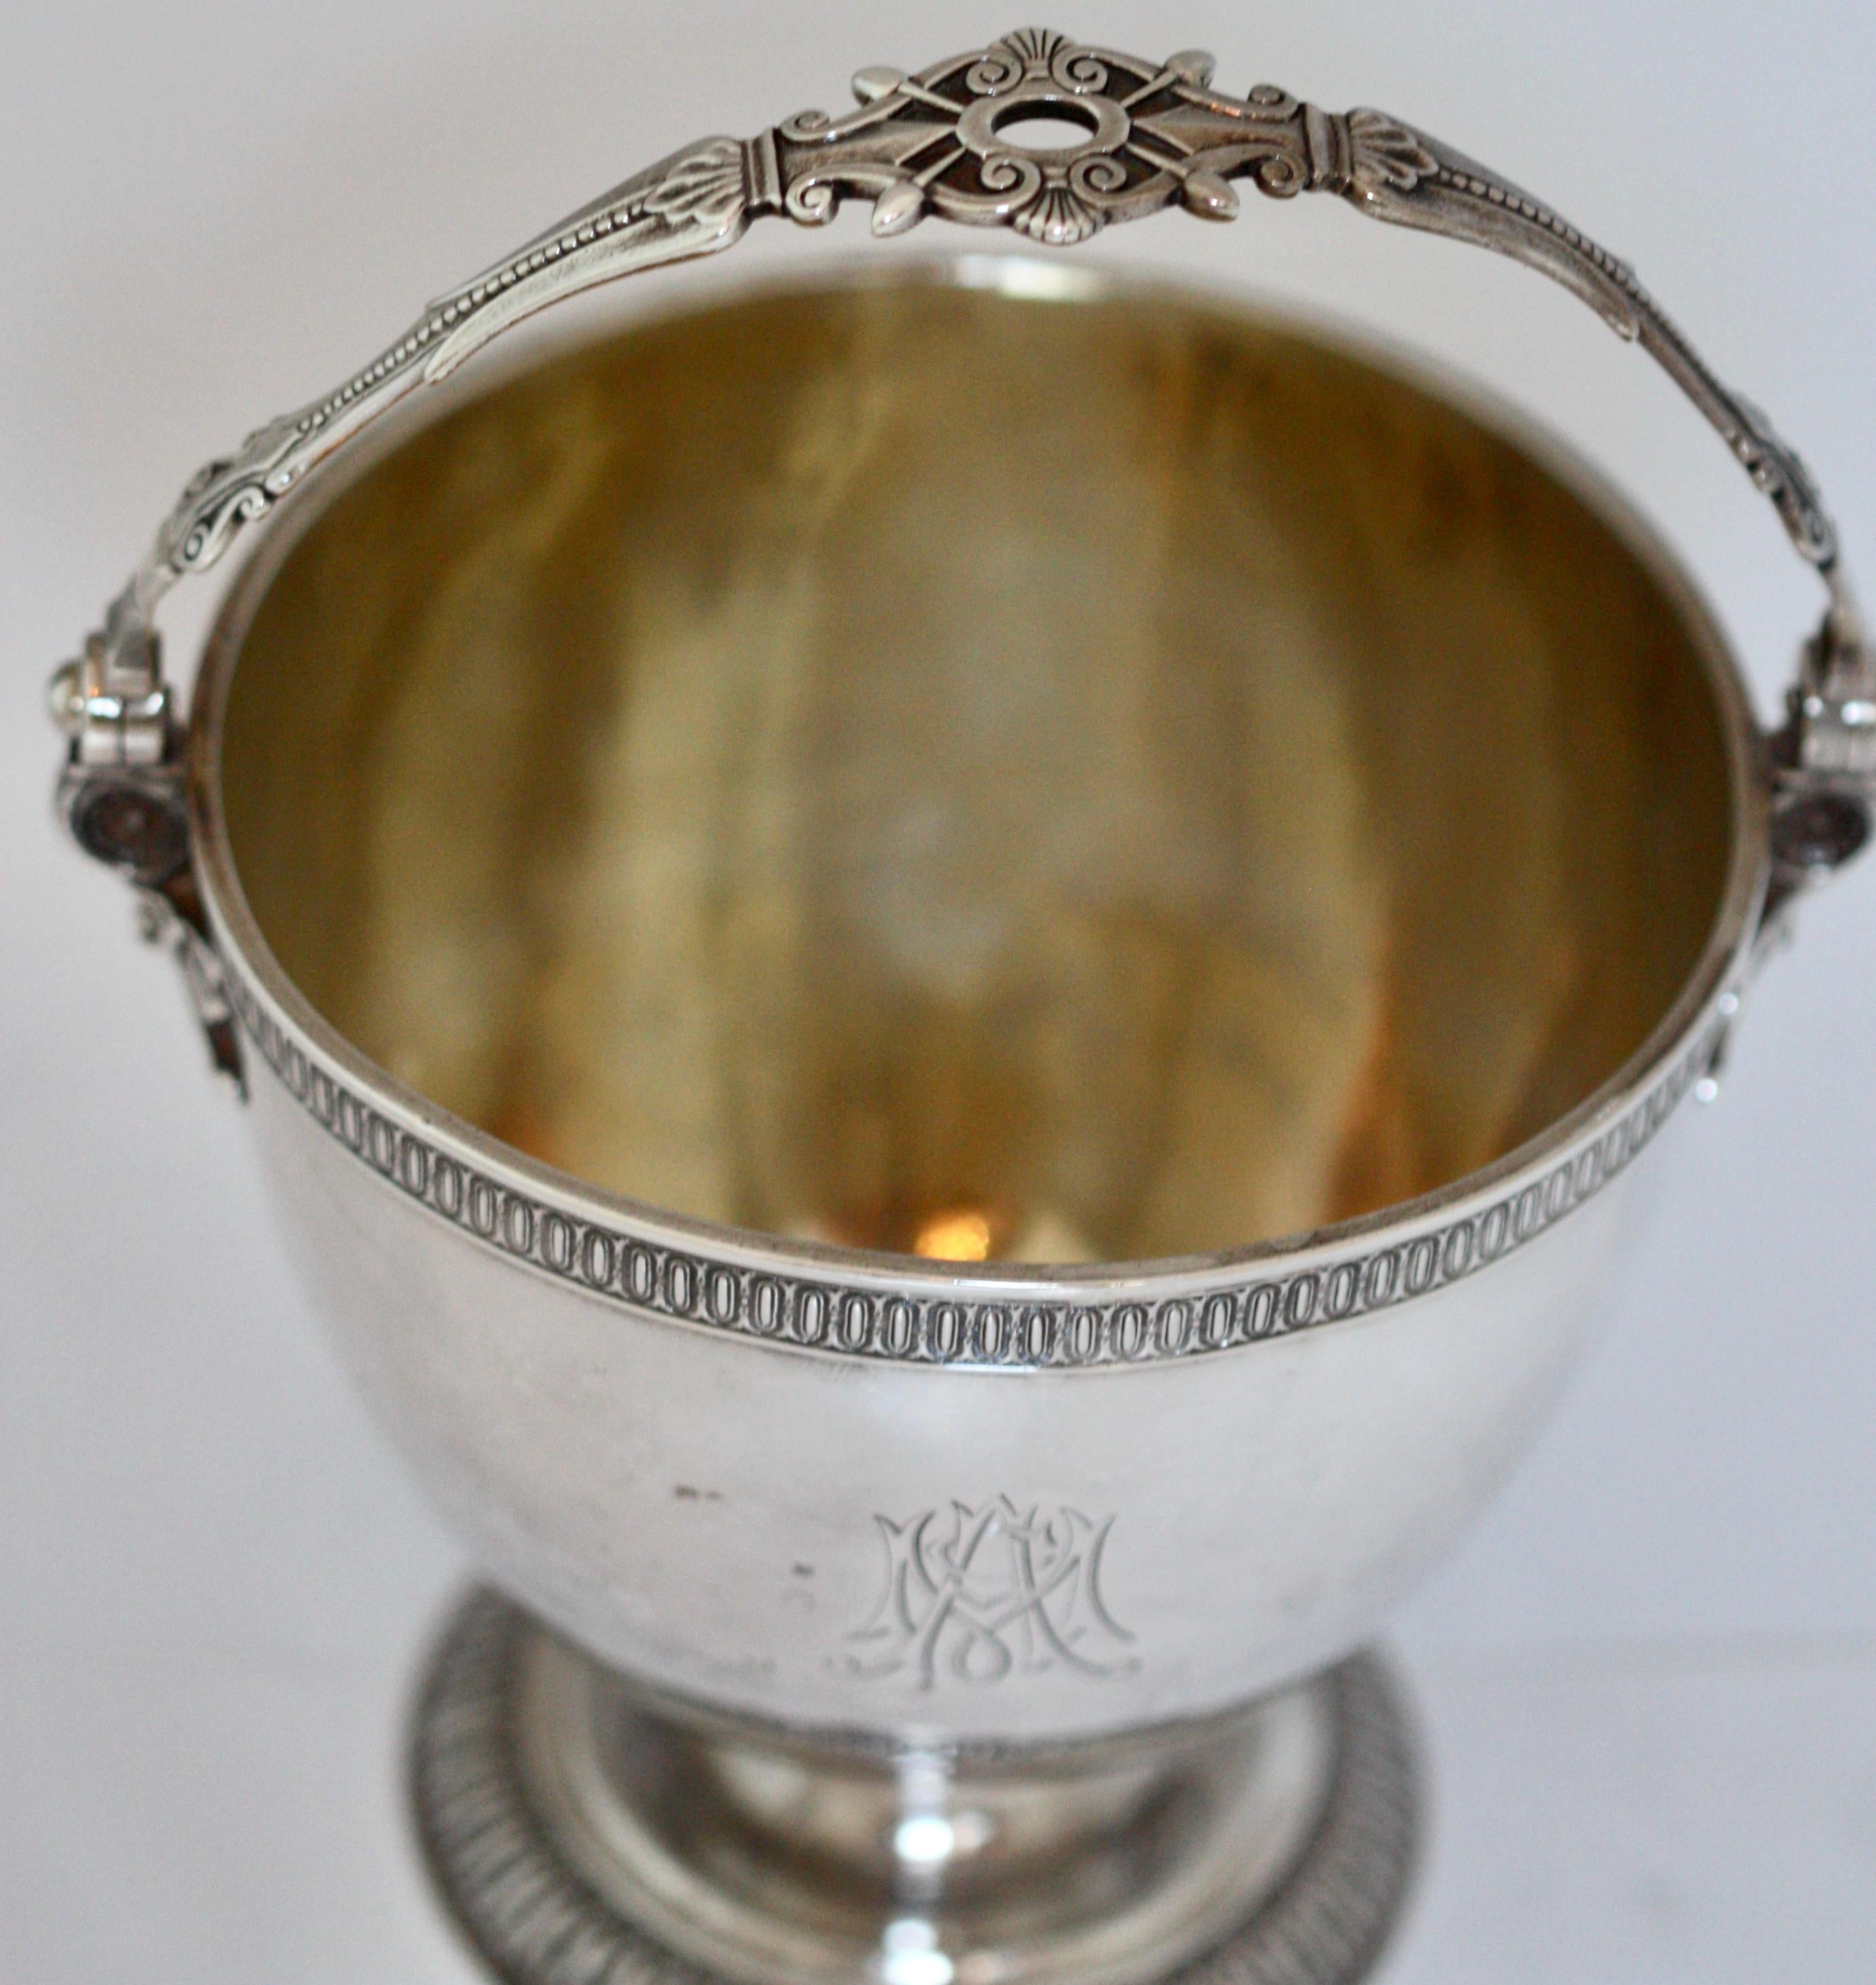 Rare Tiffany & Co. Sterling Silver Sugar Bowl In Good Condition For Sale In West Palm Beach, FL